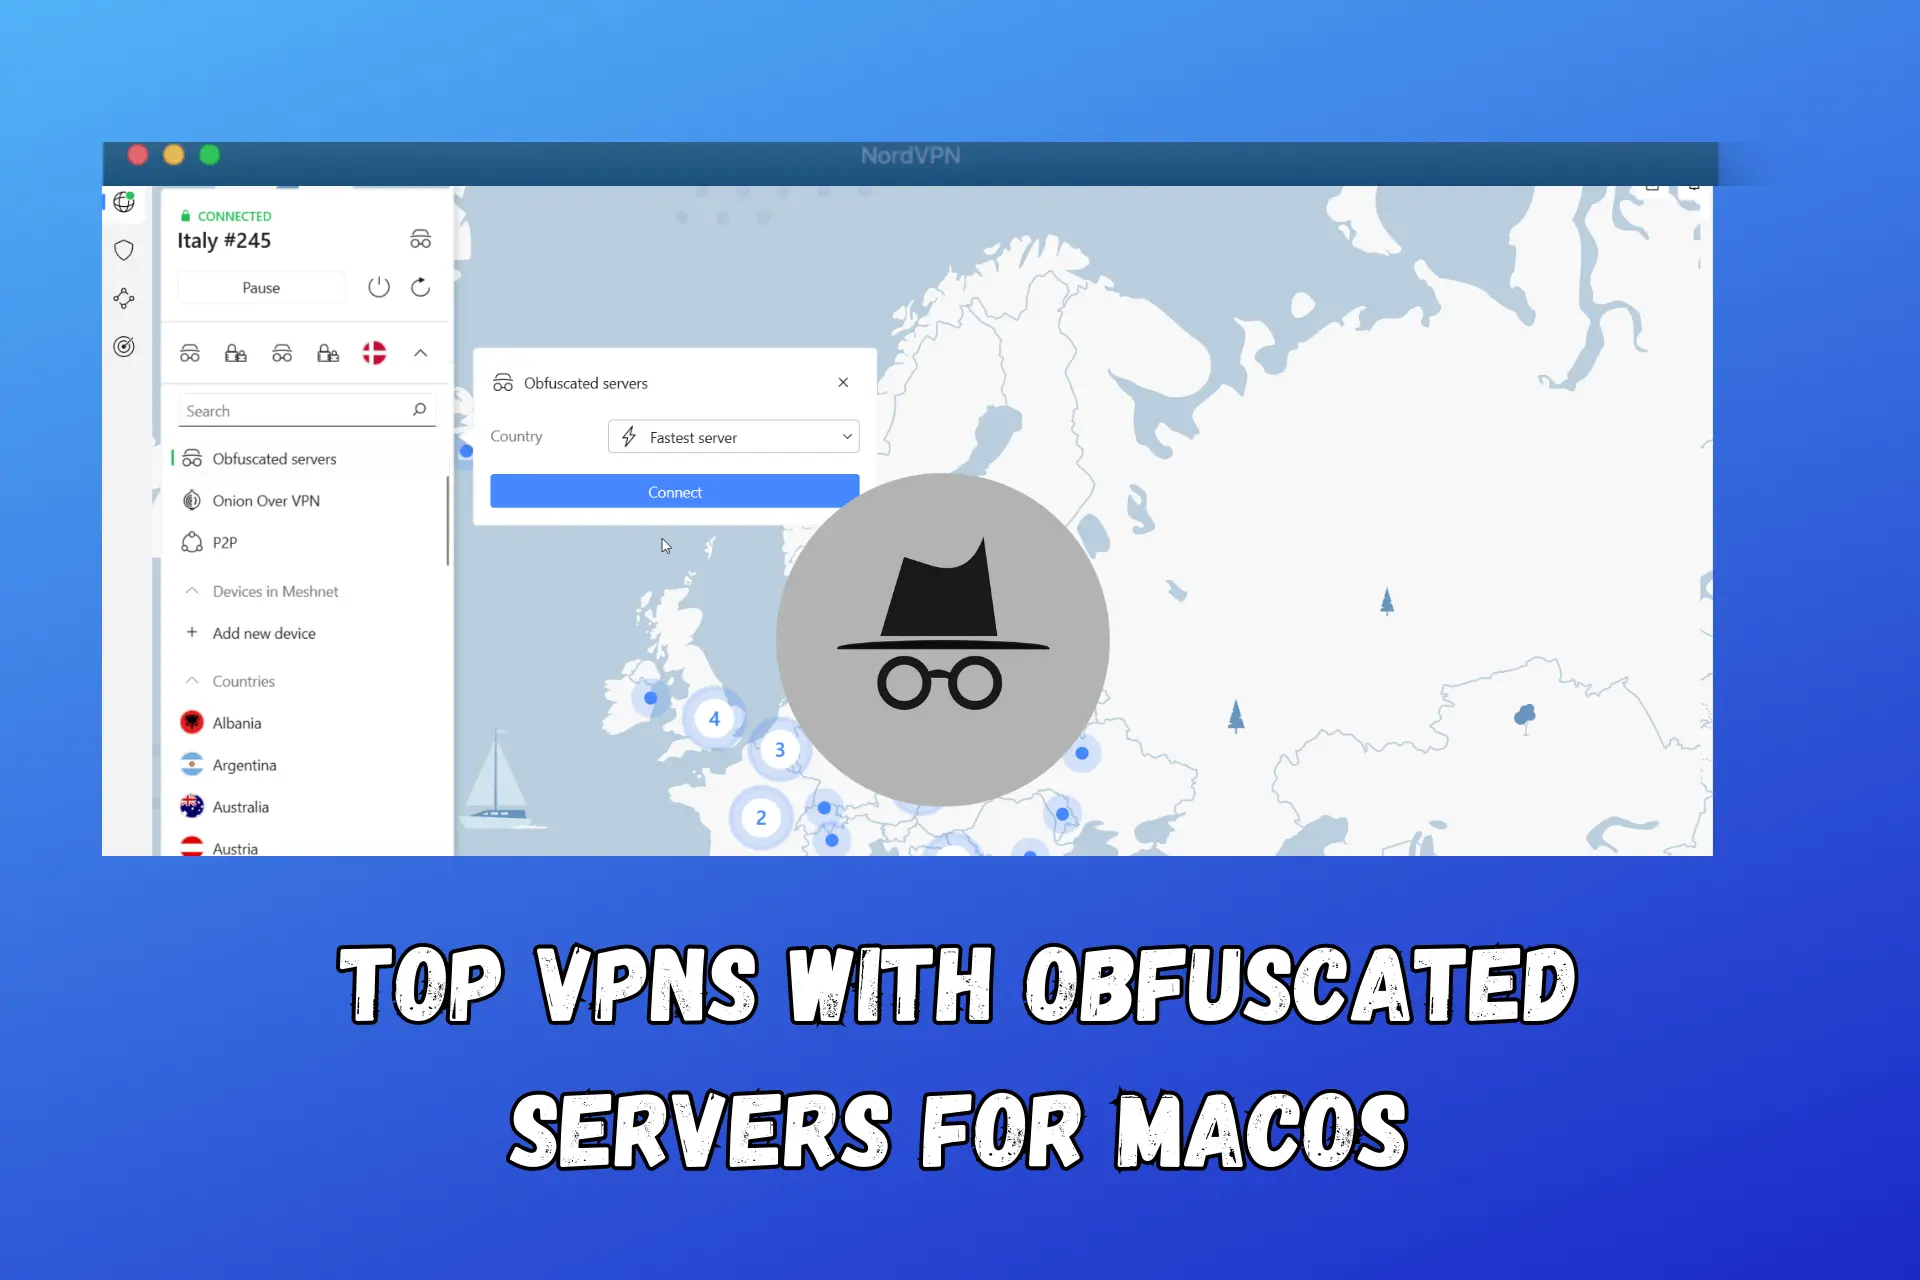 5 VPNs with Obfuscated Servers that Work Great on MacOS